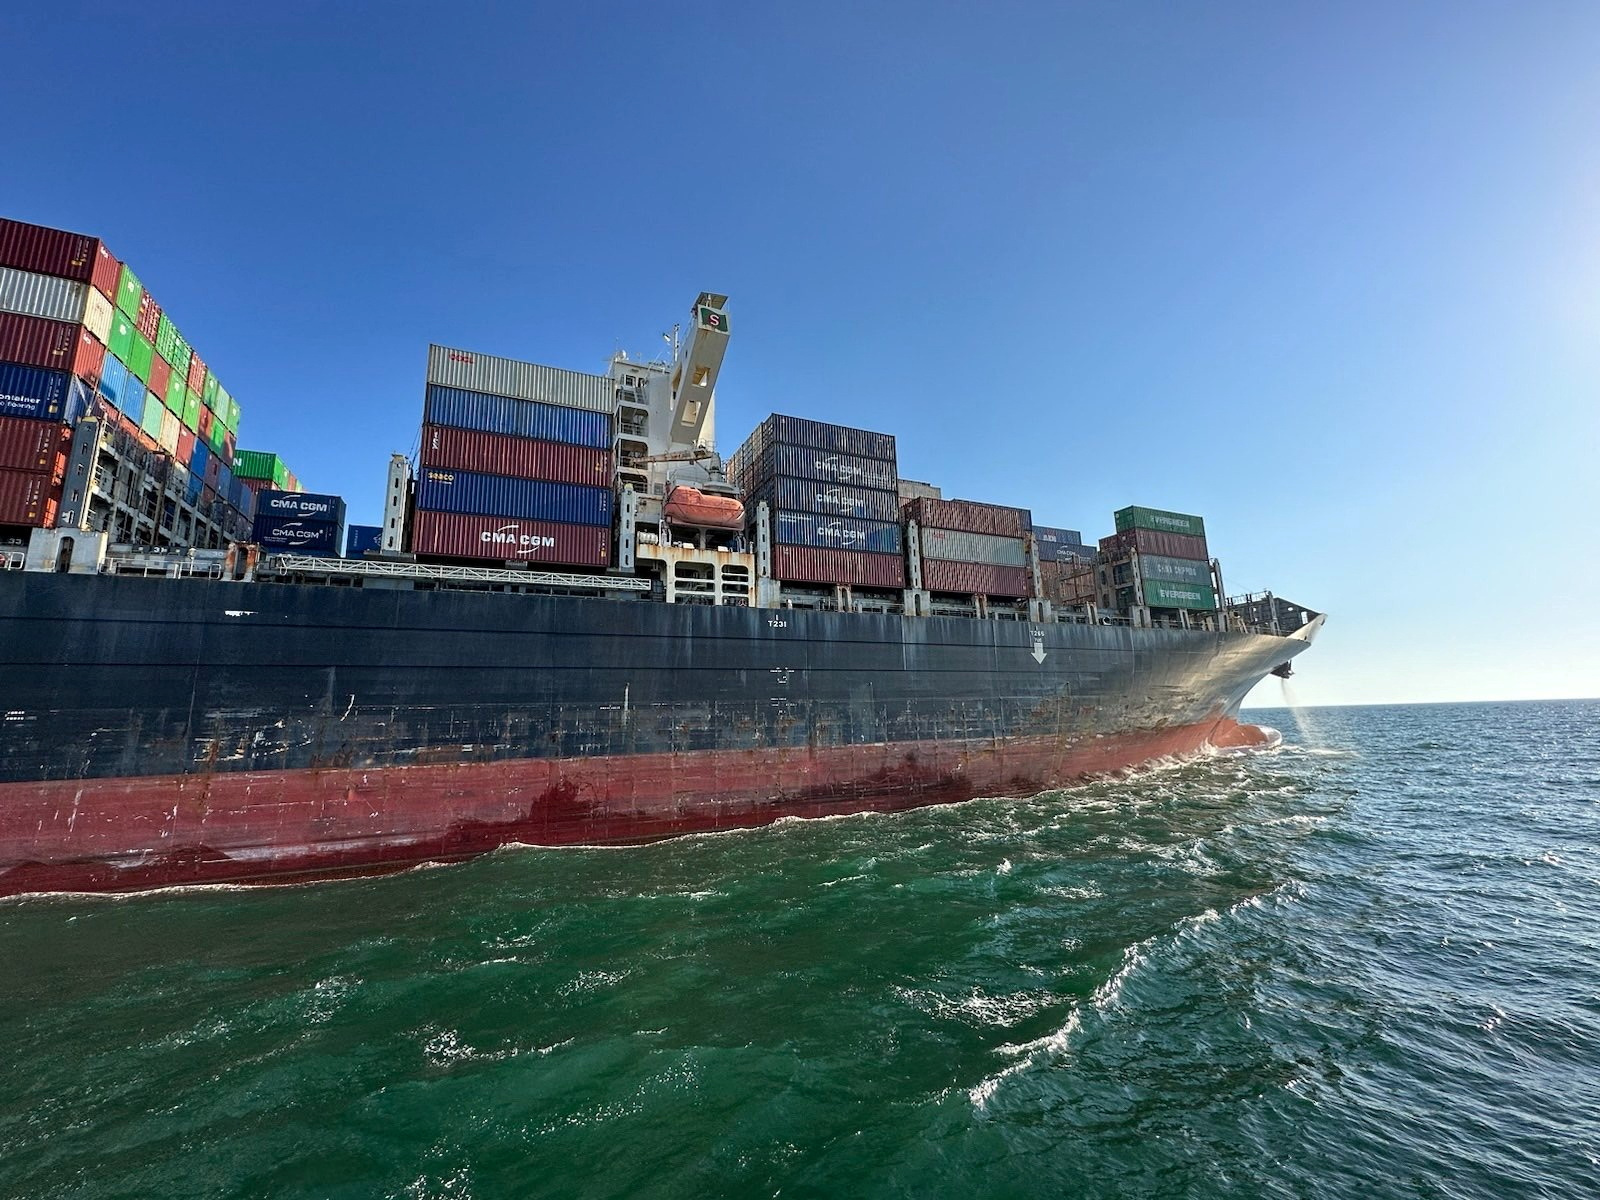 Hong Kong-flagged container ship Joseph Schulte leaves the sea port, in Odesa, Ukraine, in this handout picture released August 16.